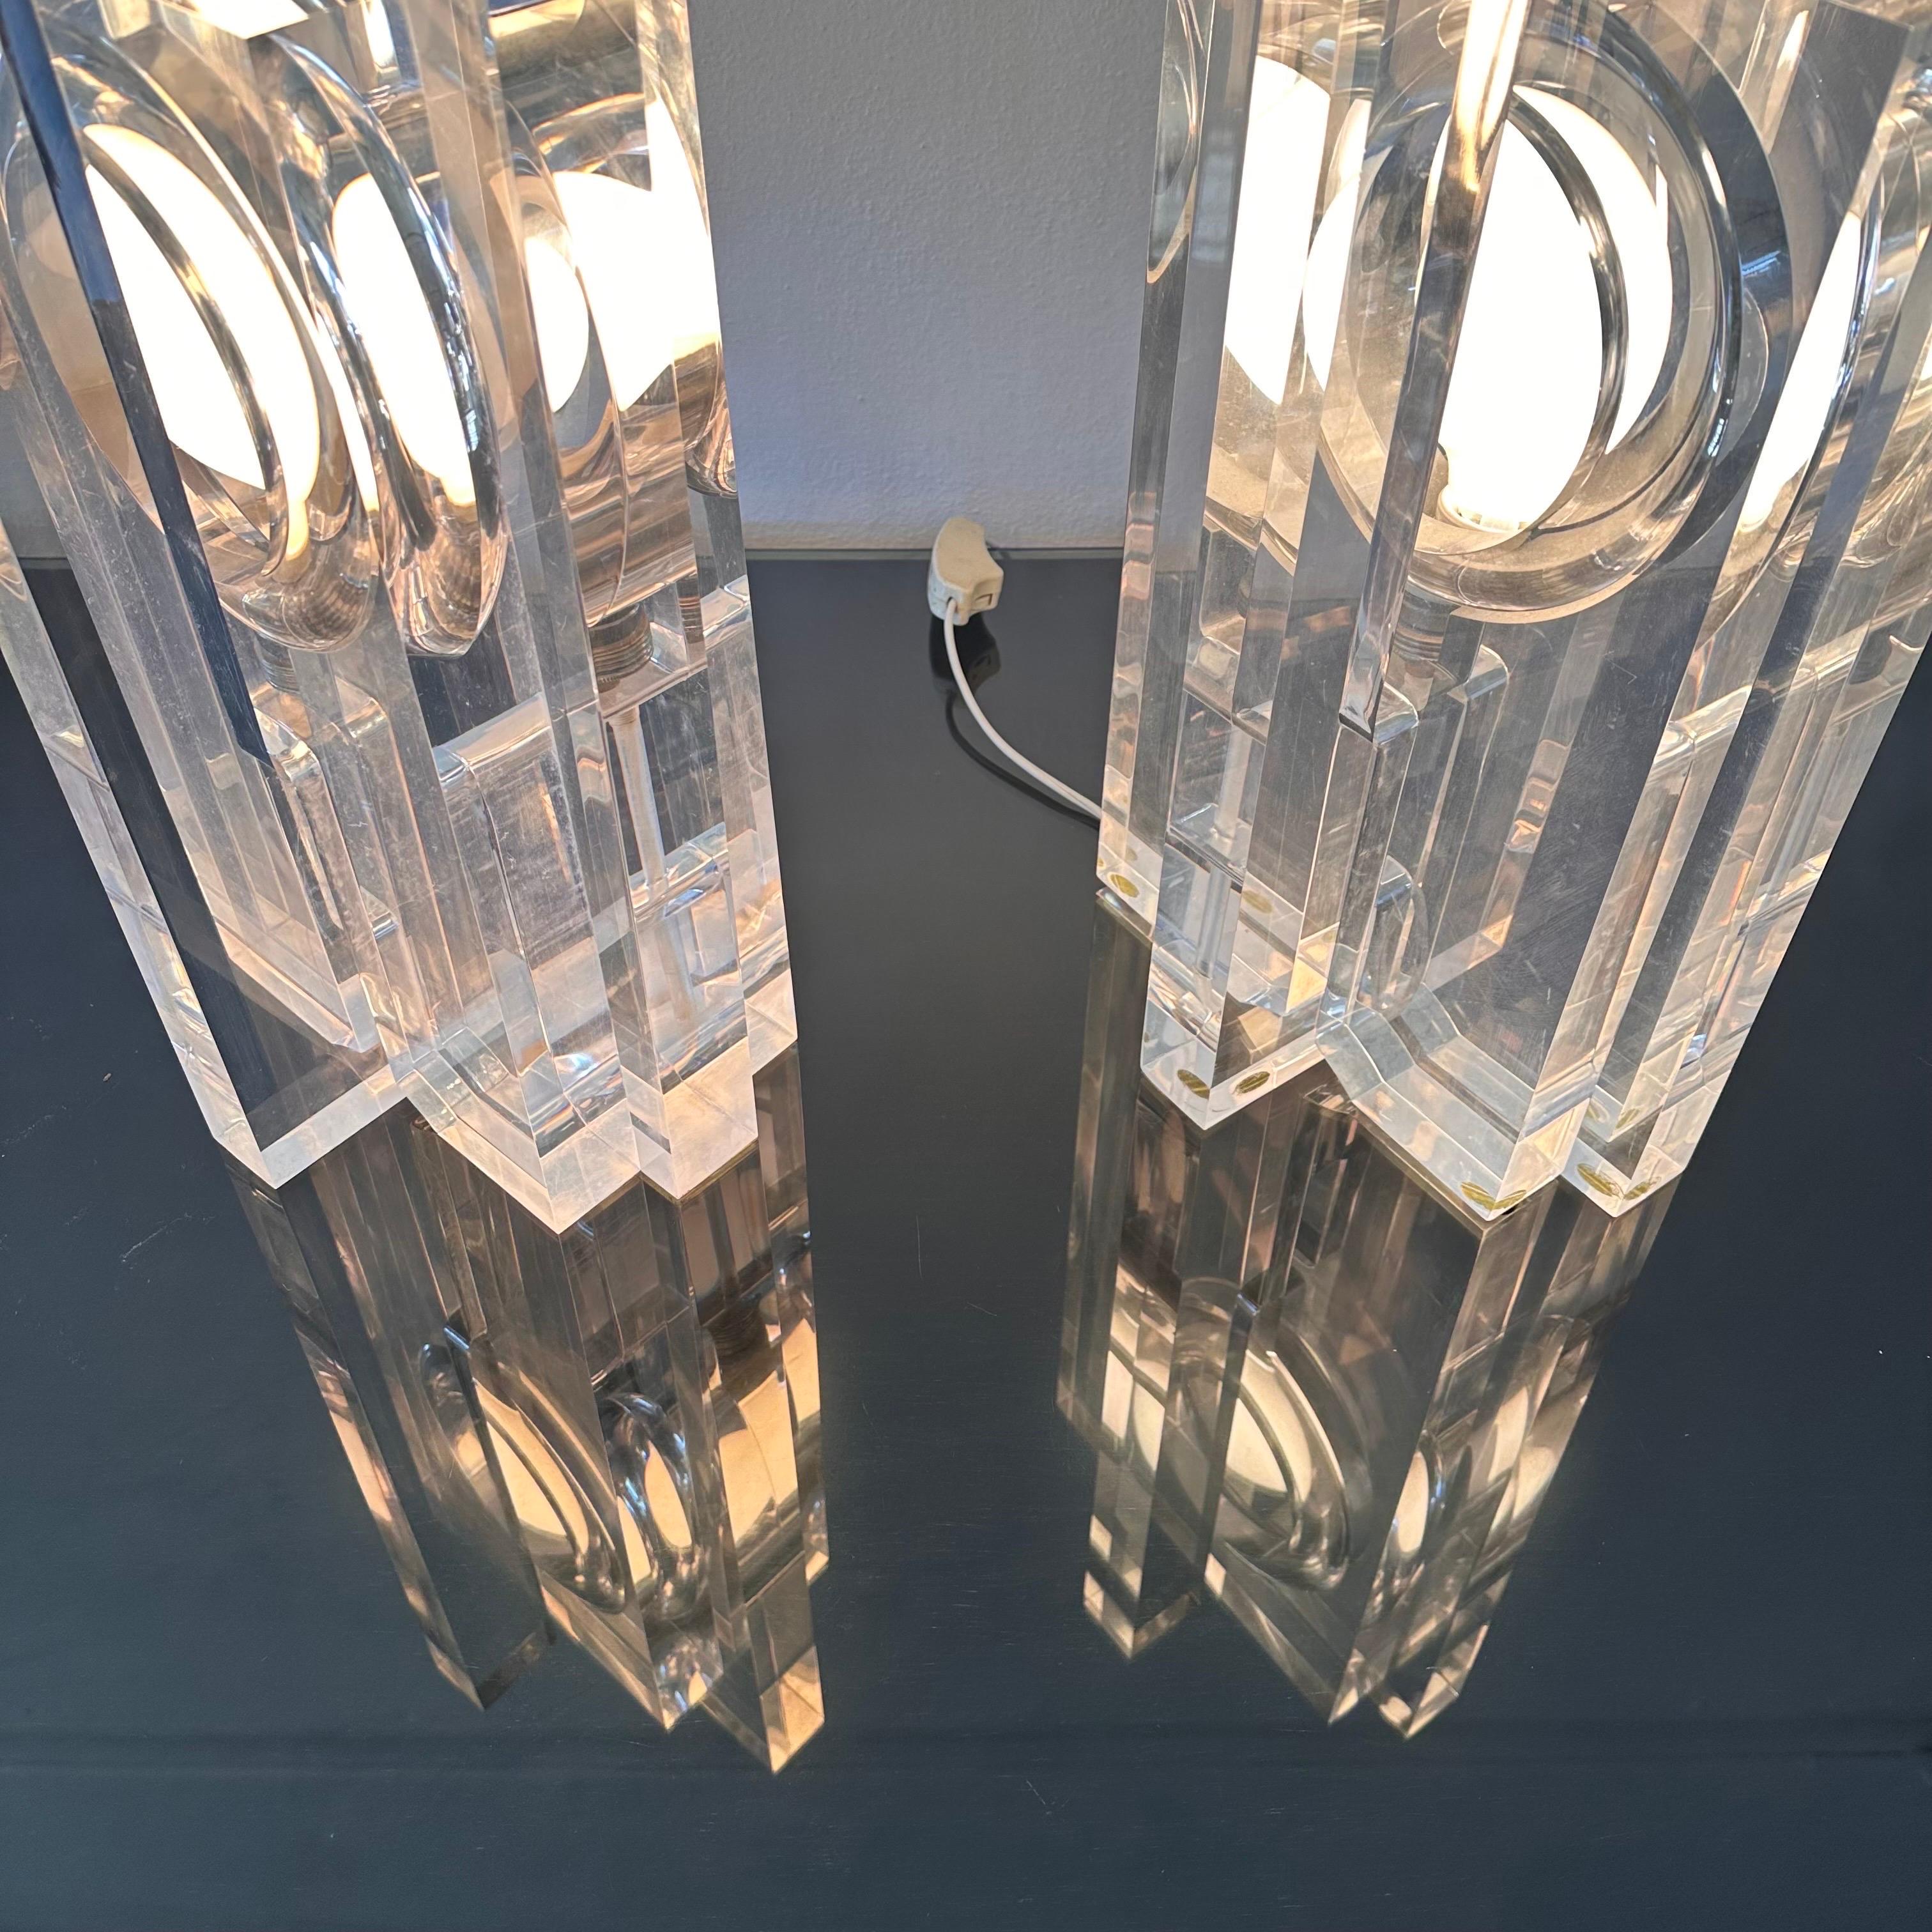 Rare Vintage Sandro Petti Lucite Huge Table Lamps for Metallarte, 1970s For Sale 6